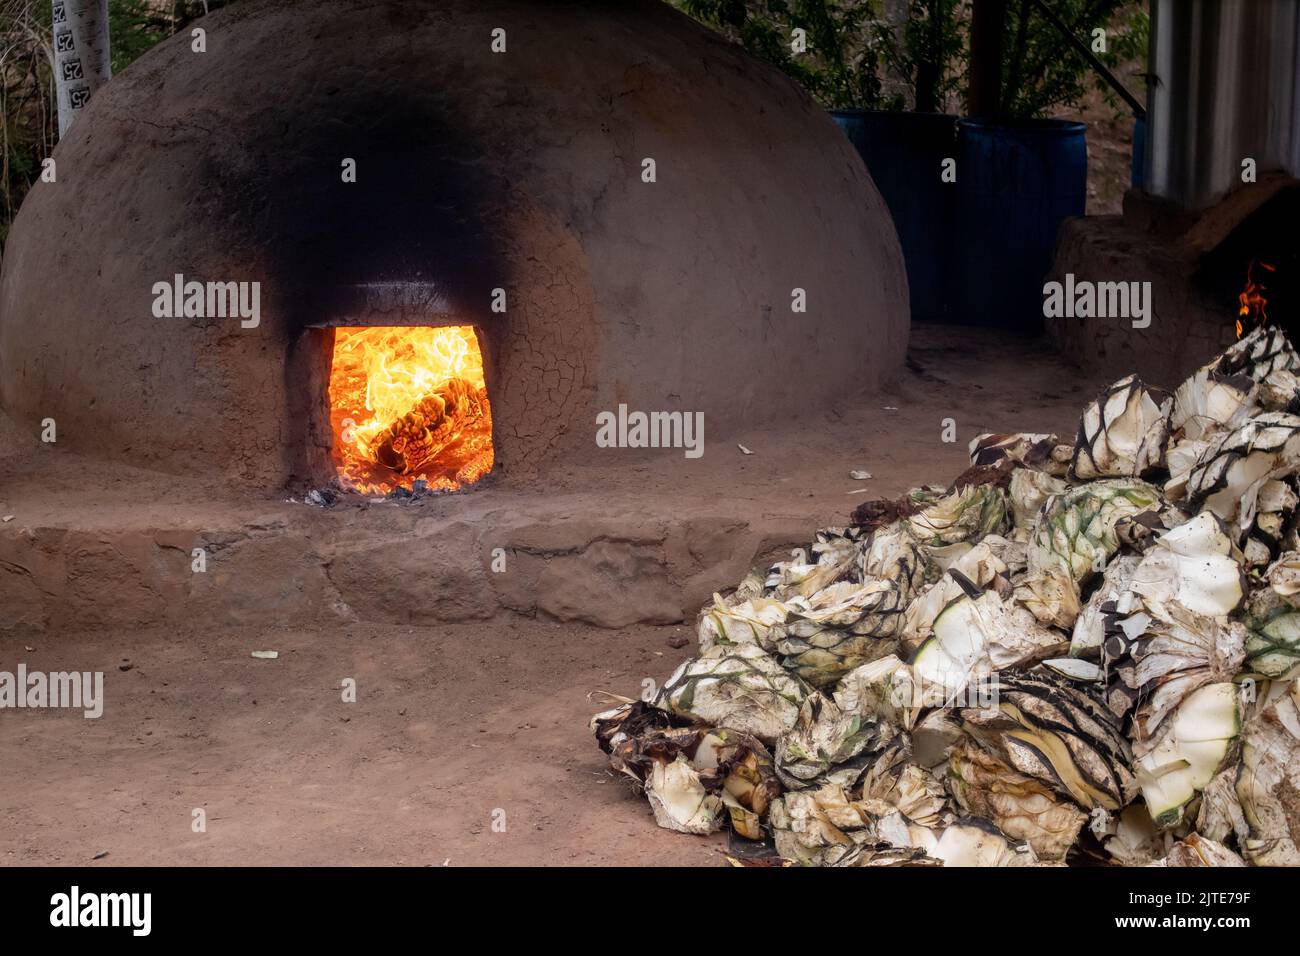 Clay Oven - A DIY With Mud and Sand